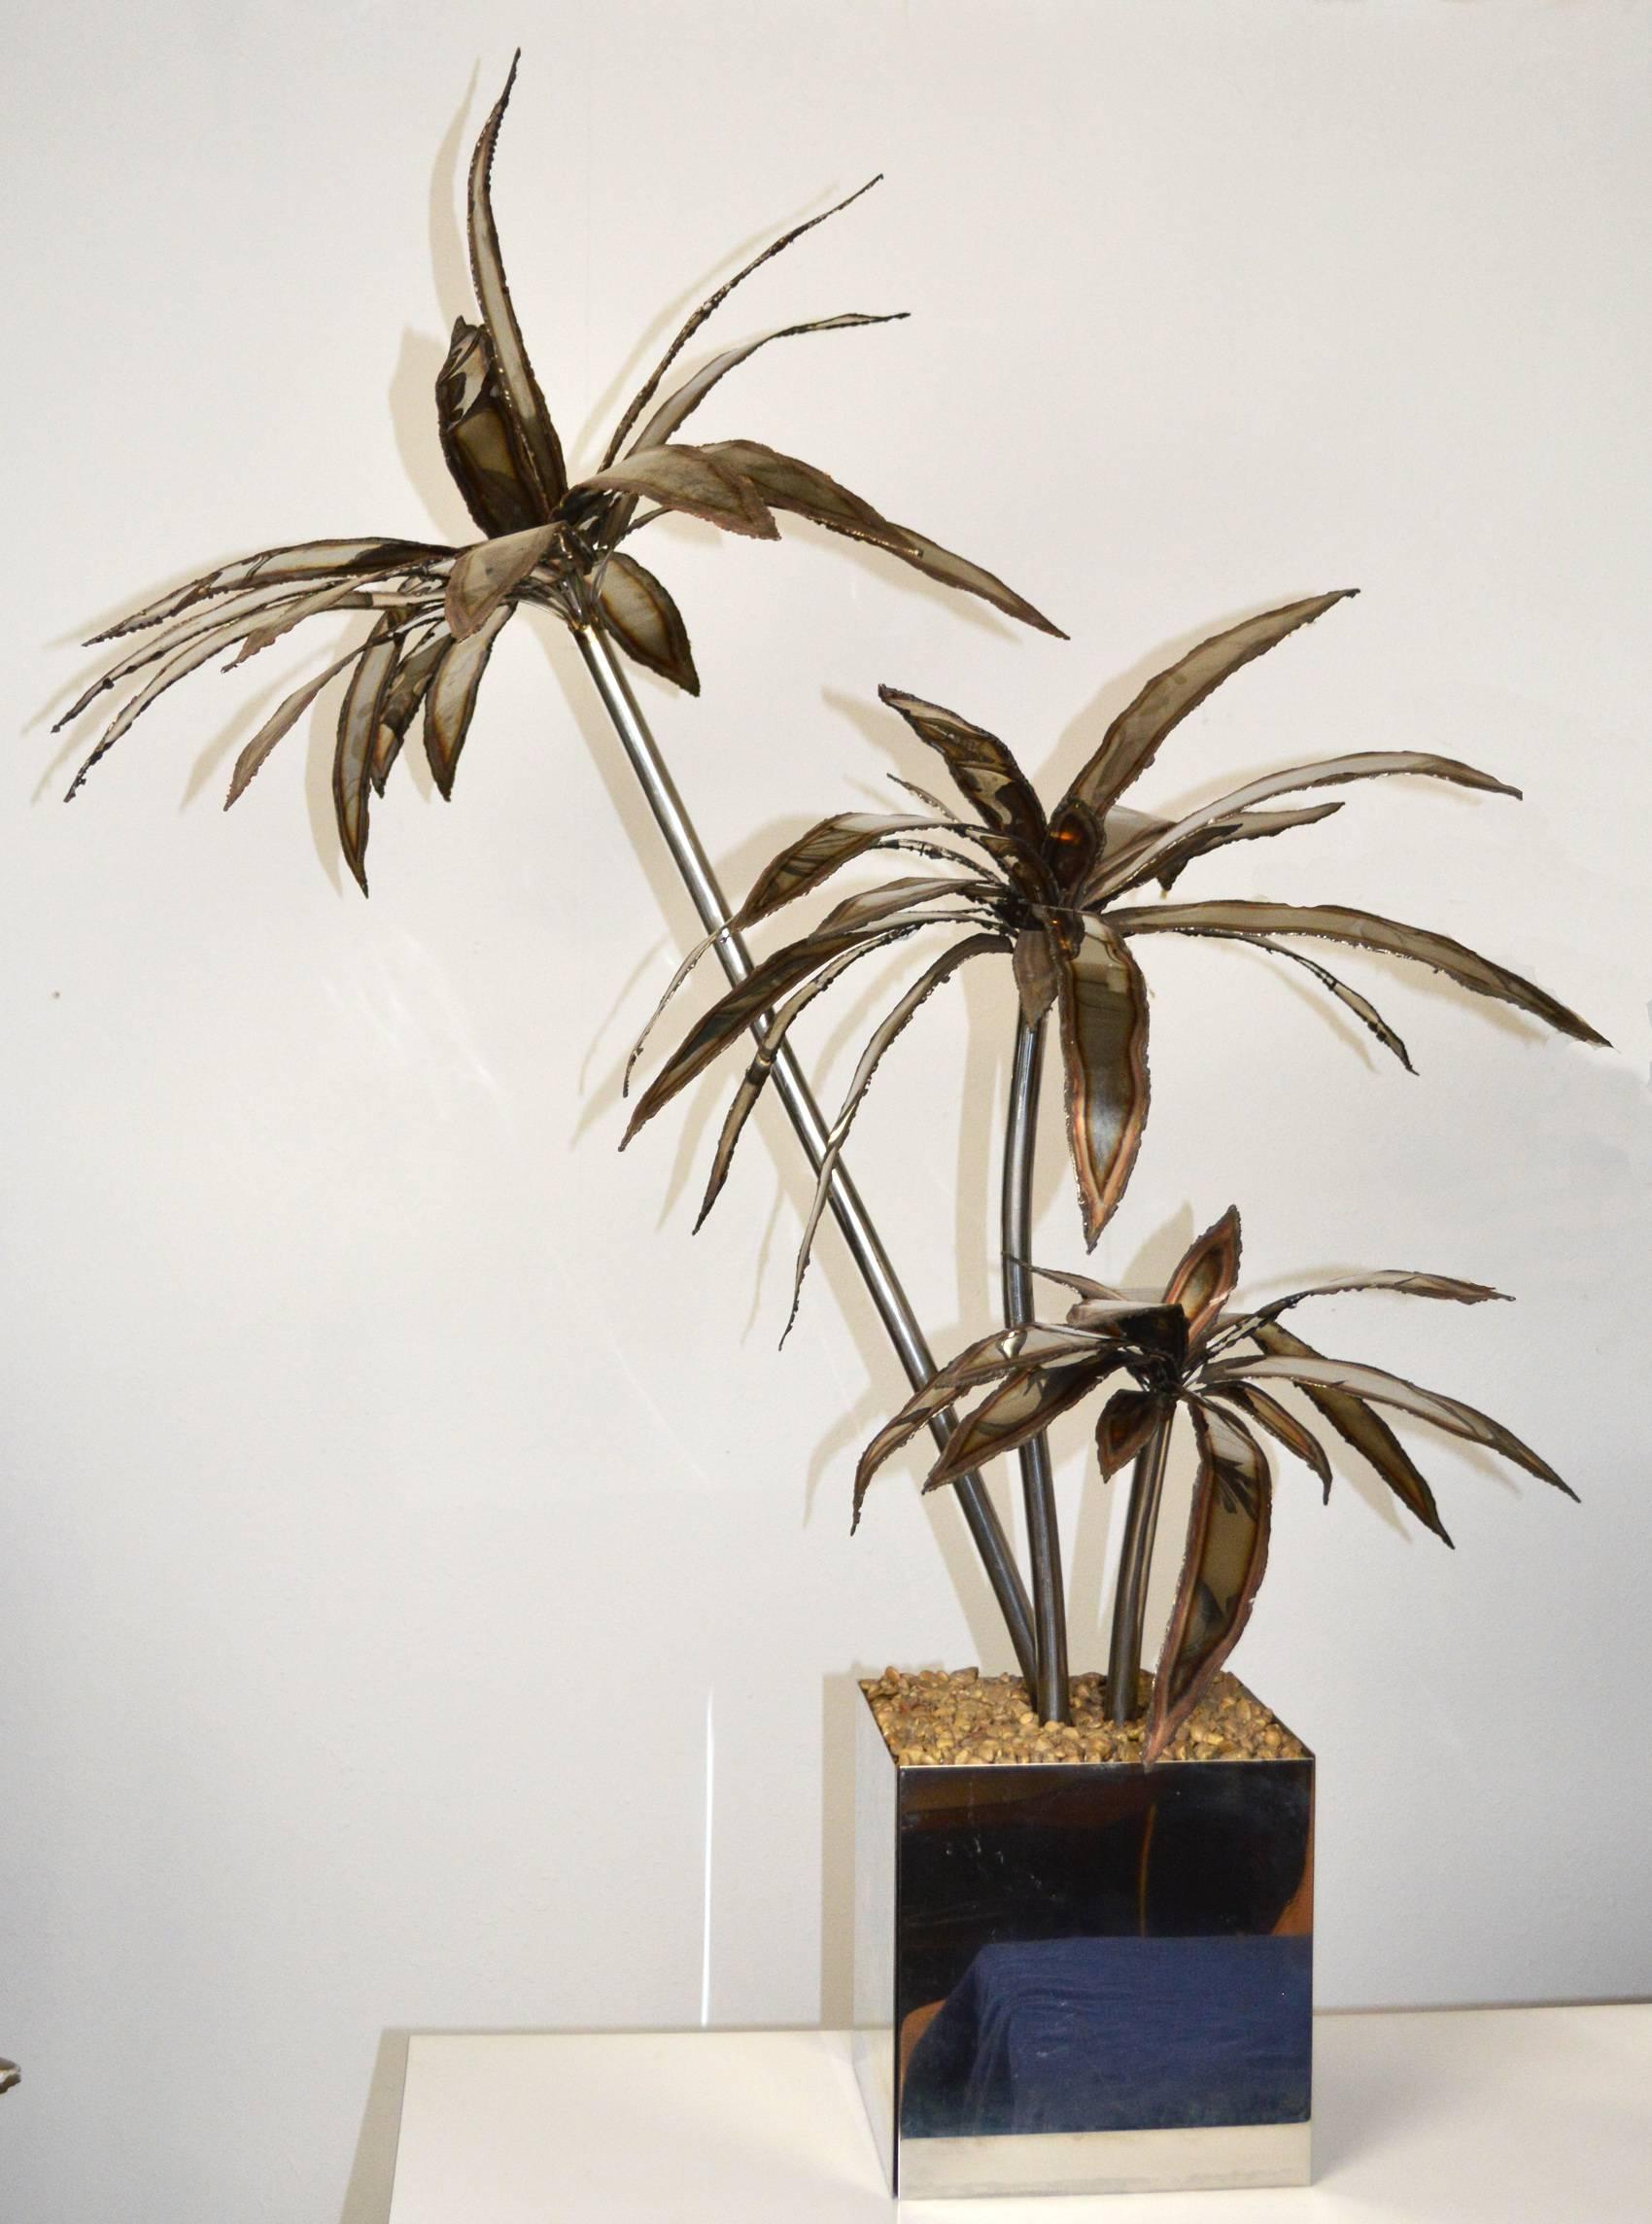 An exceptional pair of large steel palm tree sculptures in the manner of Maison Jansen. Three metal trunks with patinated fronds in a polished steel planter with fixed gravel 'mulch.'